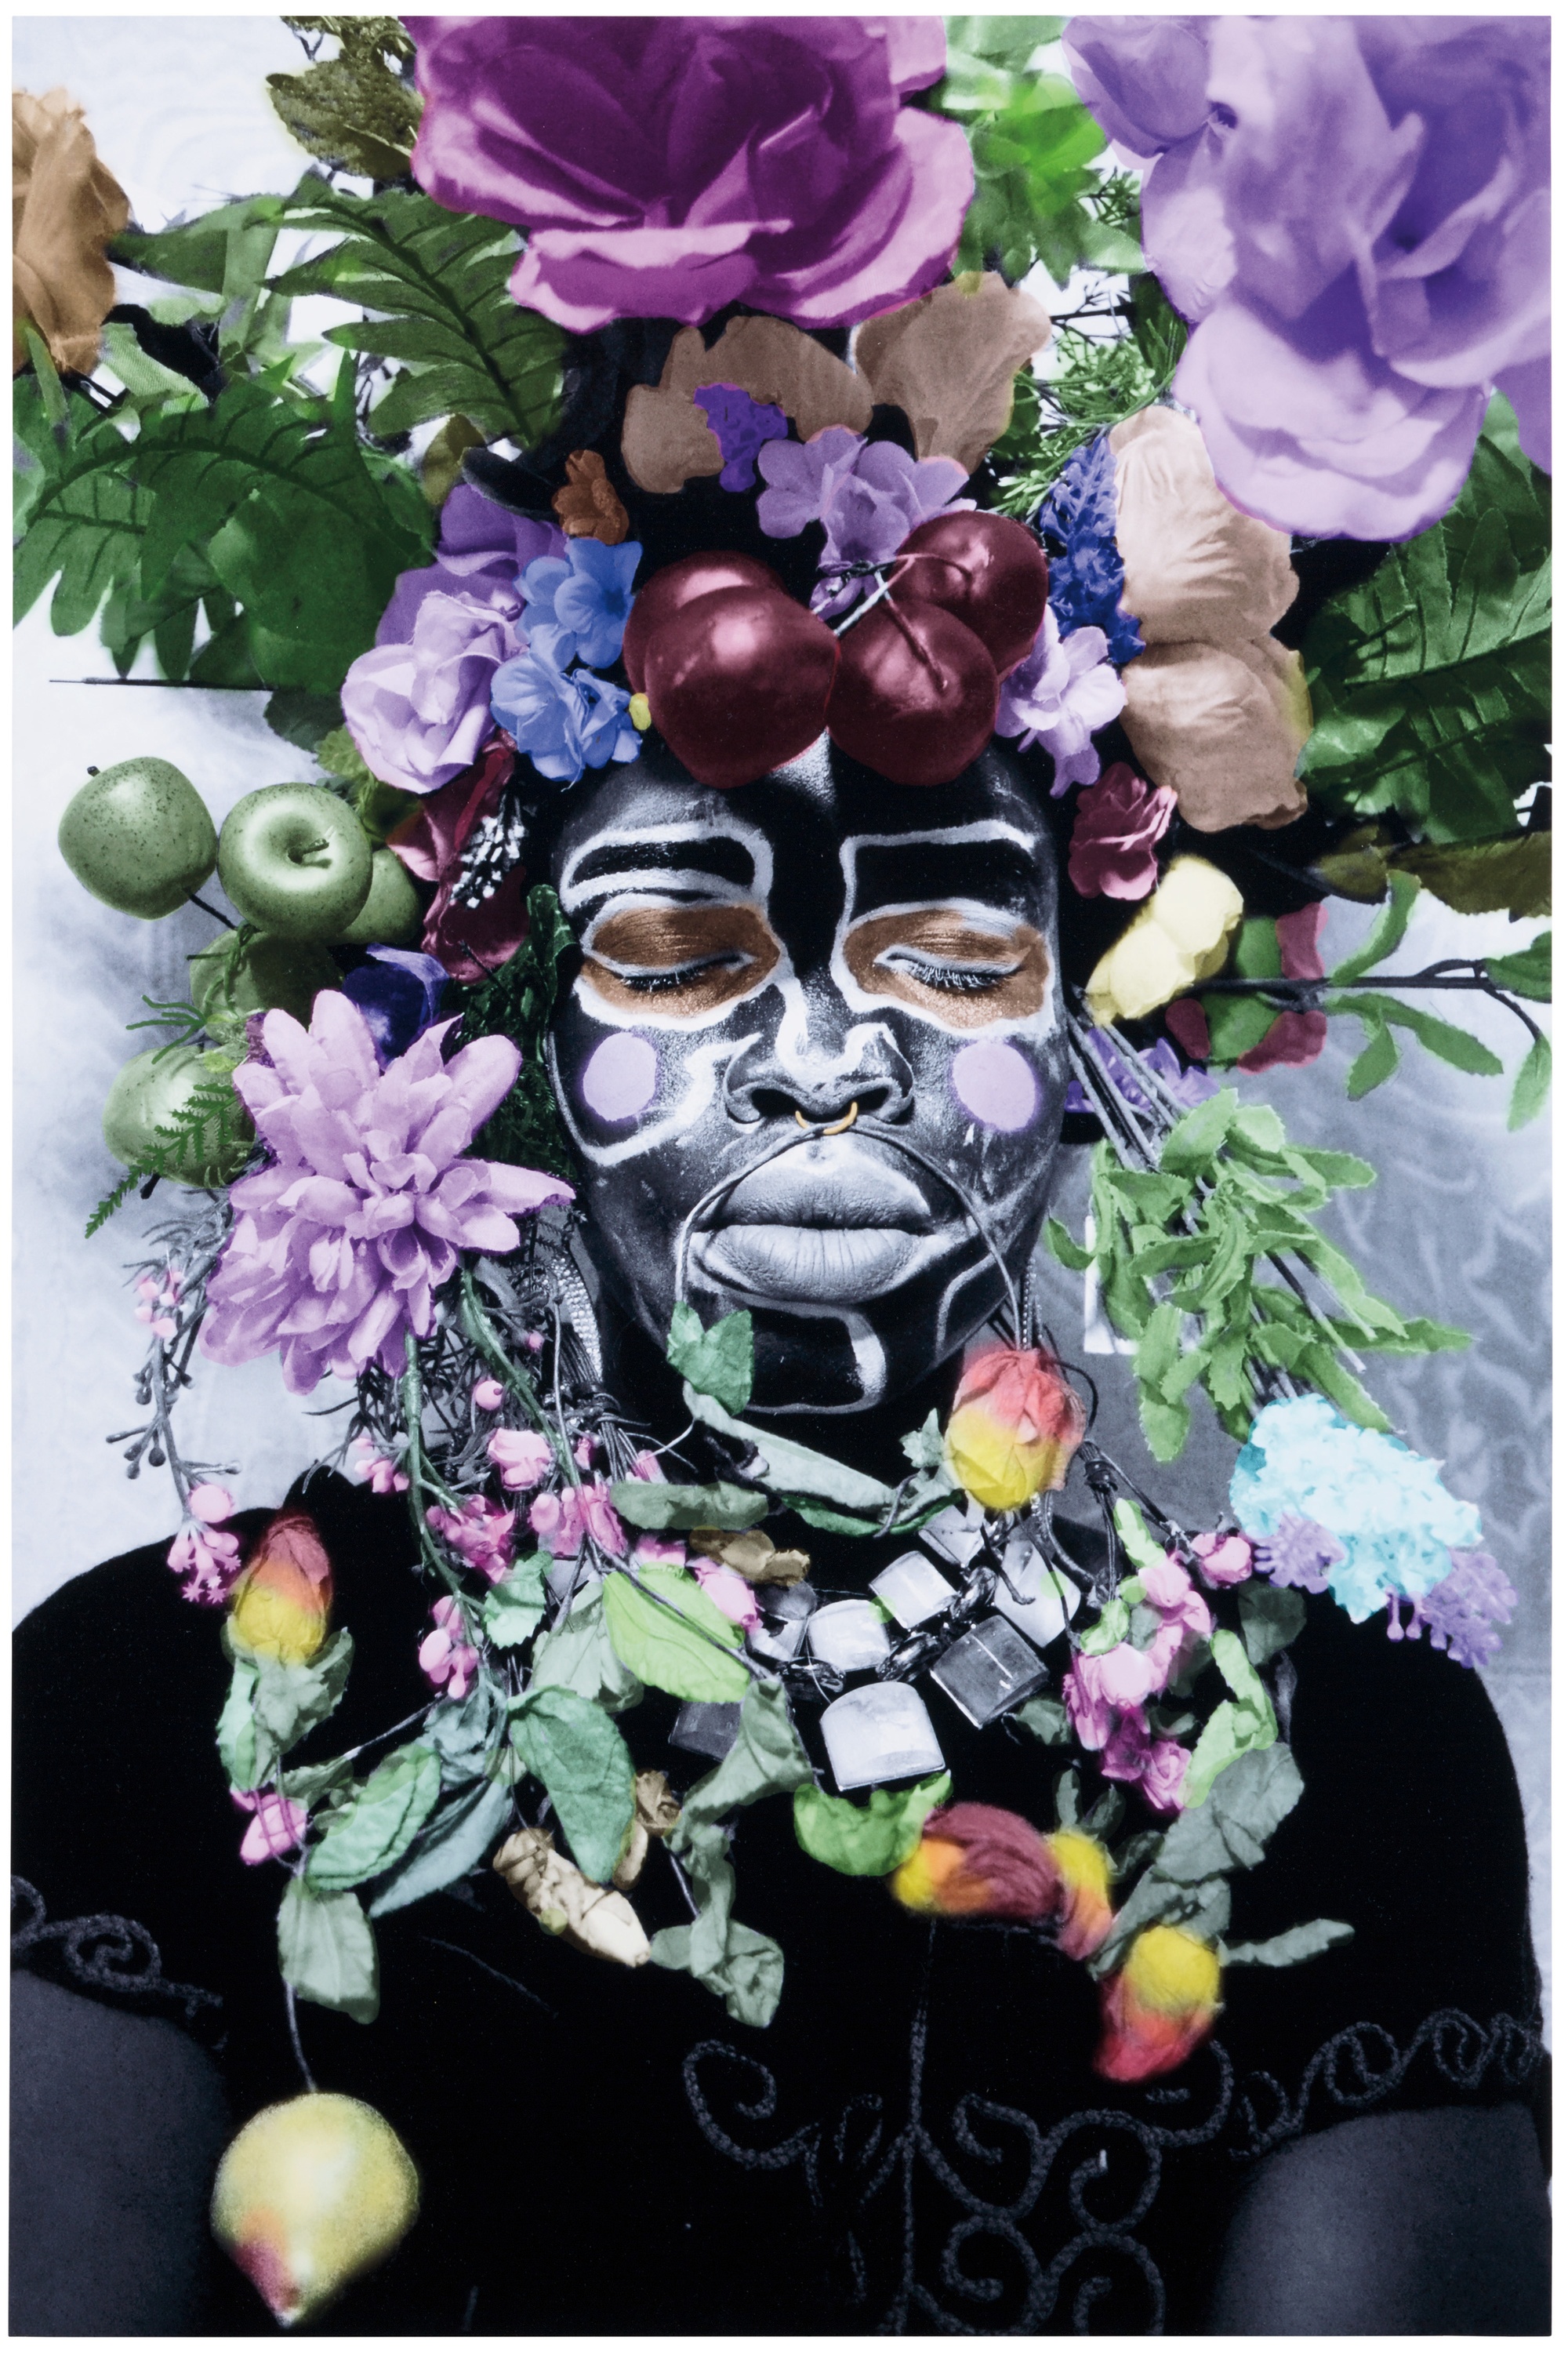 A photograph of a young, Black woman covered in black paint with green and purple flowers, leaves, and fruit draped around her neck and covering her head.